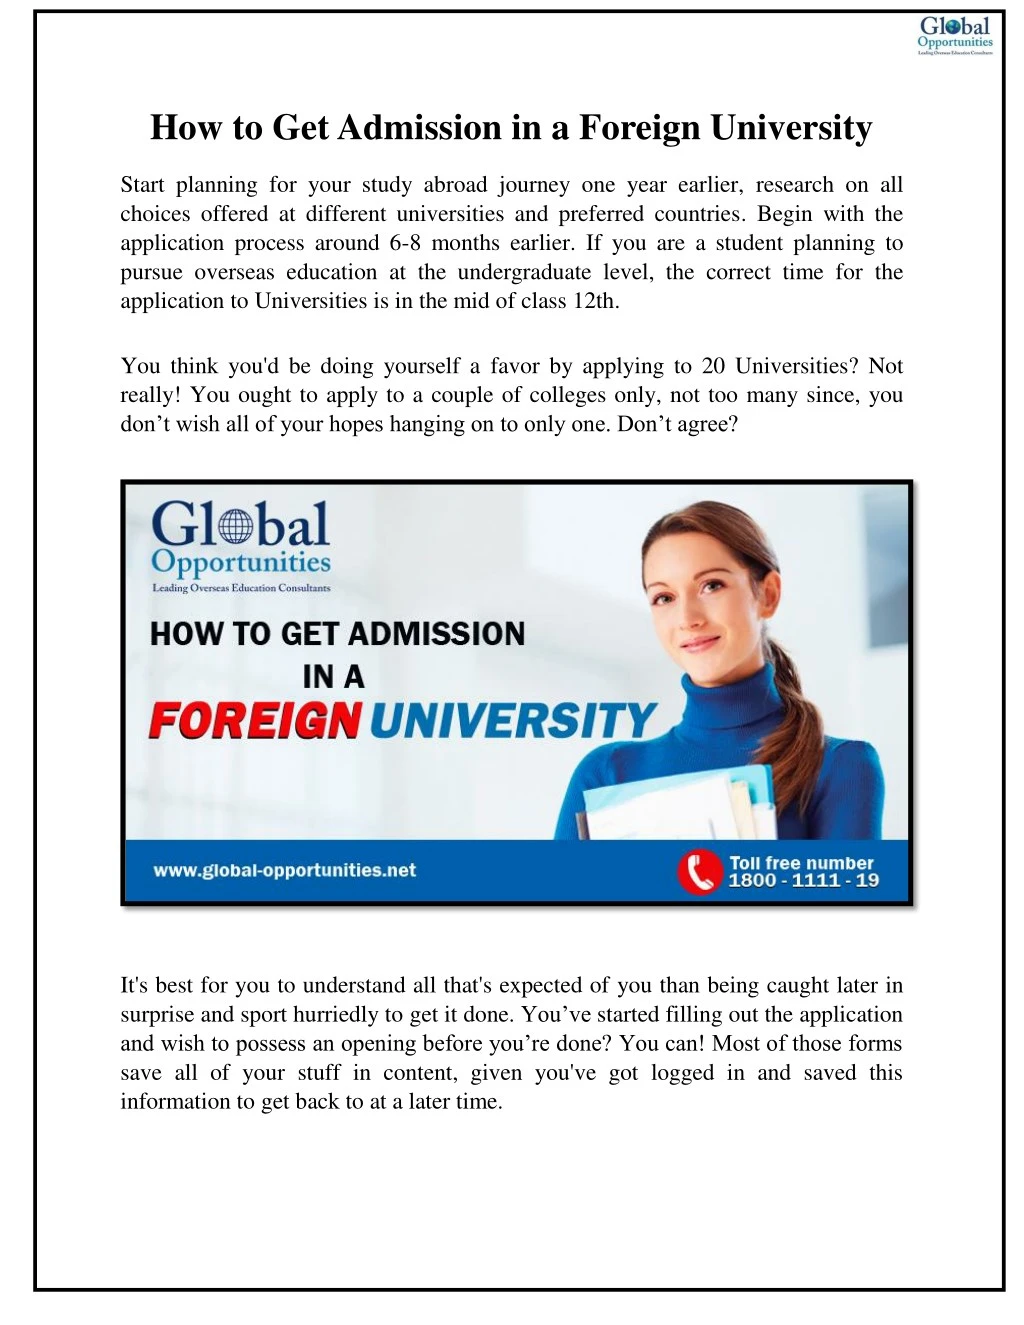 how to get admission in a foreign university